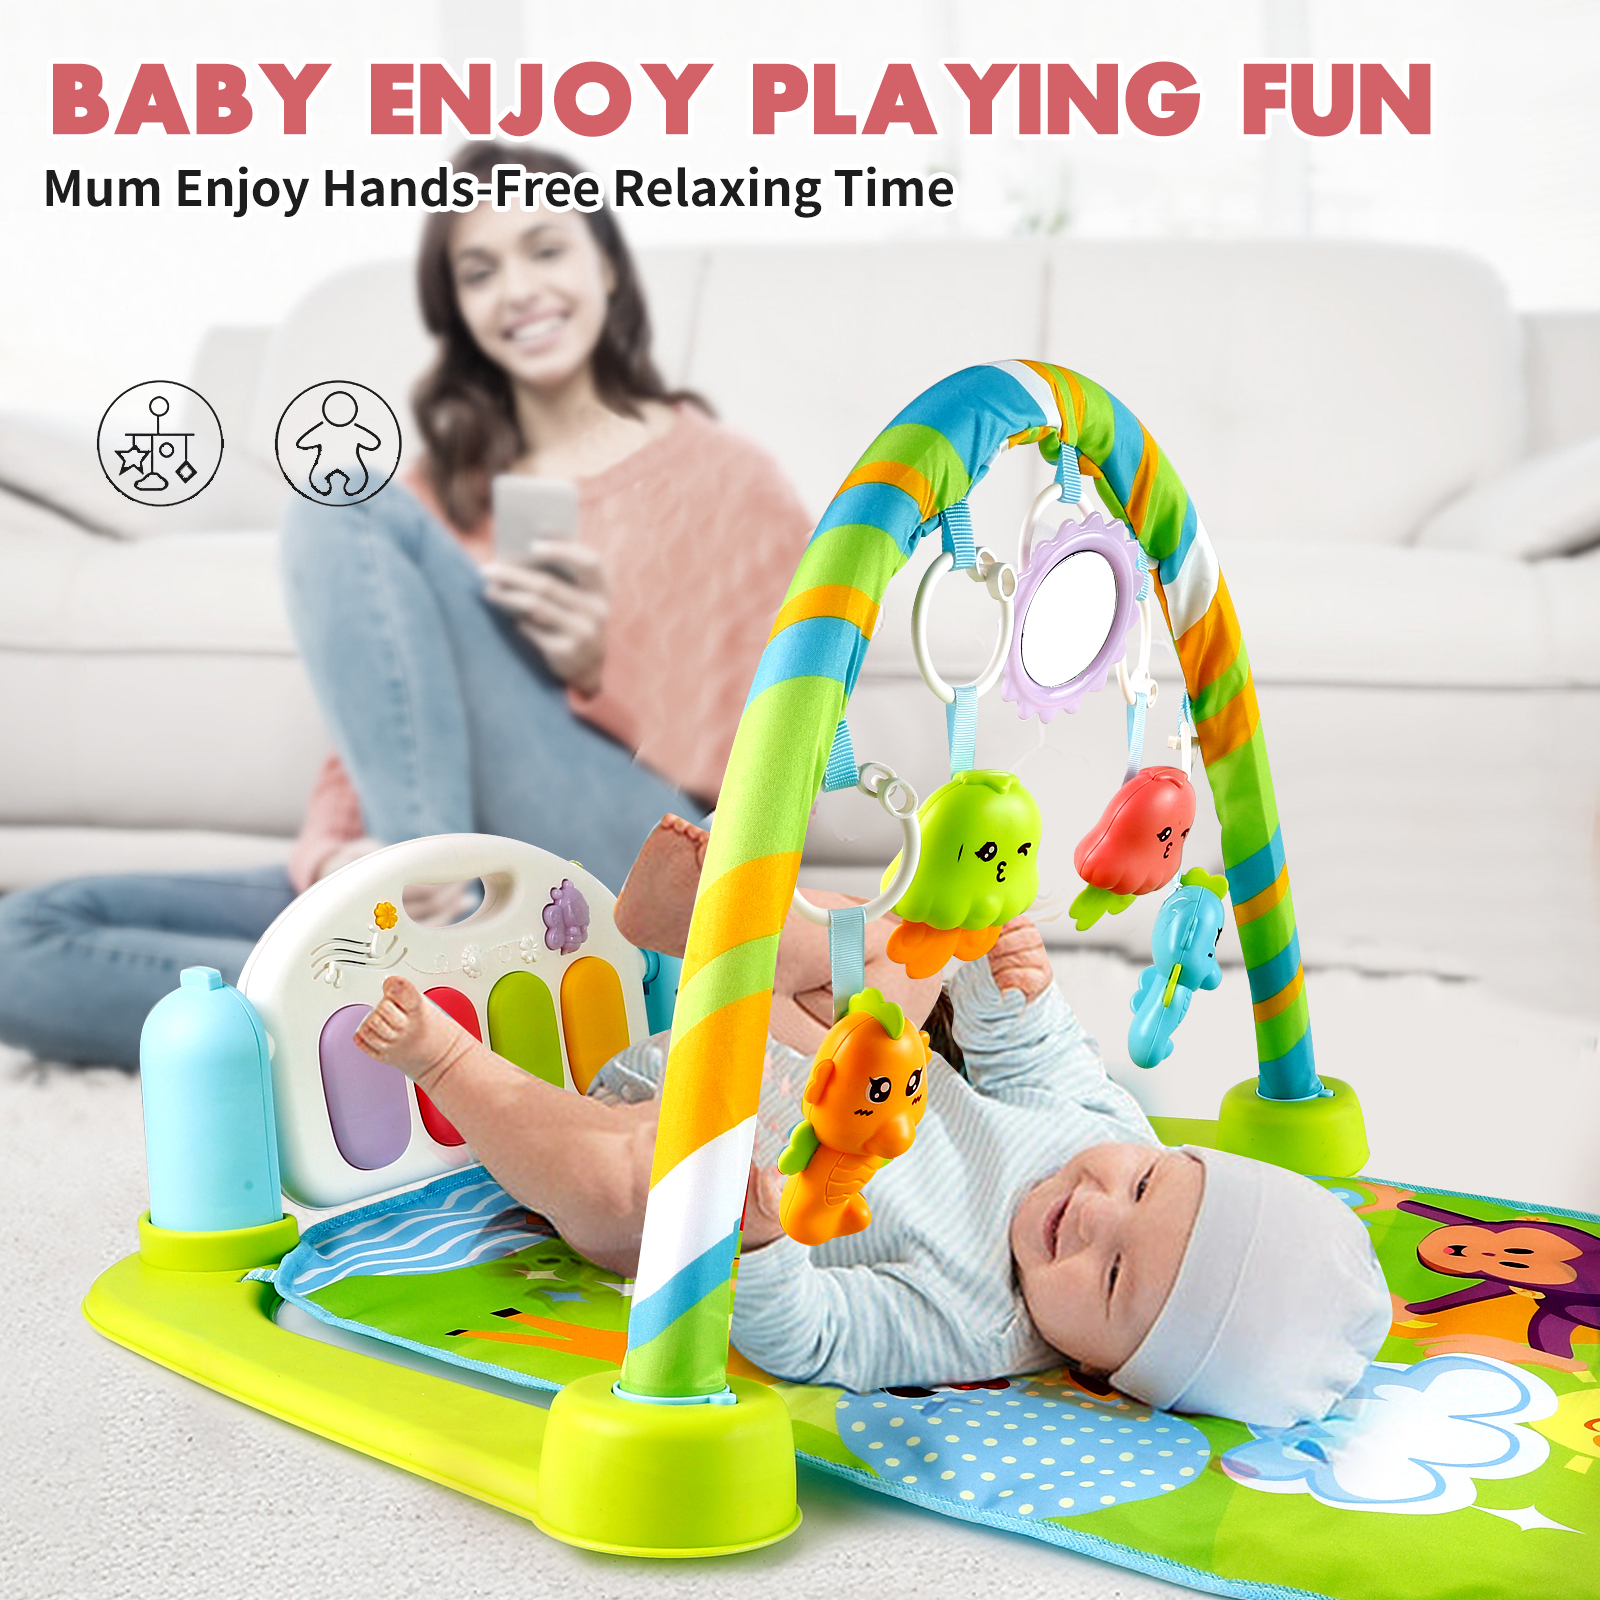 Baby Play Mat Baby Gym Funny Play Piano Tummy Time Baby Activity Gym Mat with 5 Infant Learning Sensory Baby Toys, Music and Lights Boy & Girl Gifts for Newborn Baby 0 to 3 6 9 12 Months - image 2 of 7